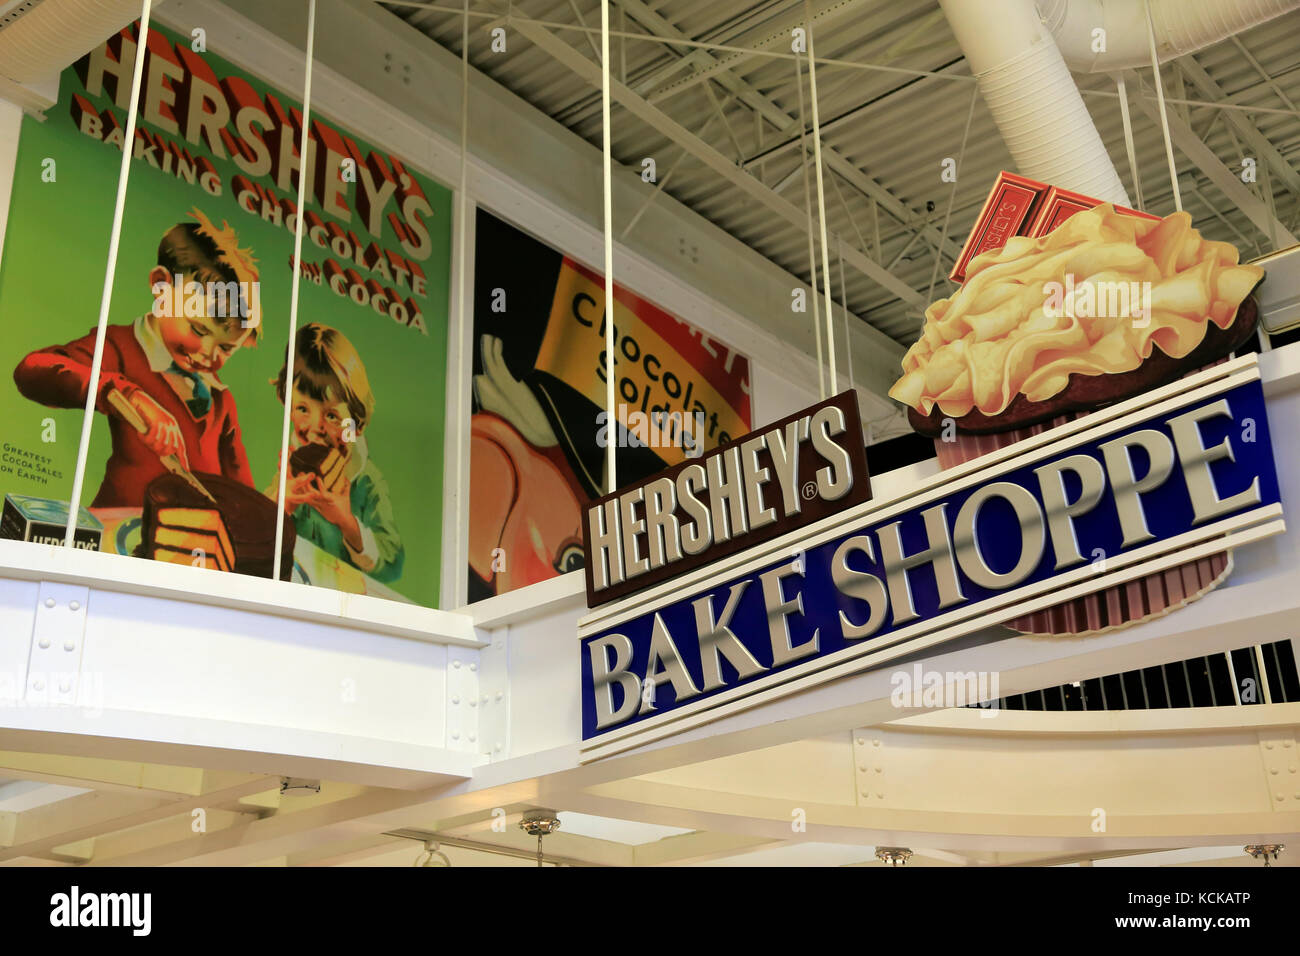 The sign of Hershey's Bake Shoppe with copies of historical posters of Hershey chocolate in Hershey's Chocolate World.Hershey.Pennsylvania.USA Stock Photo